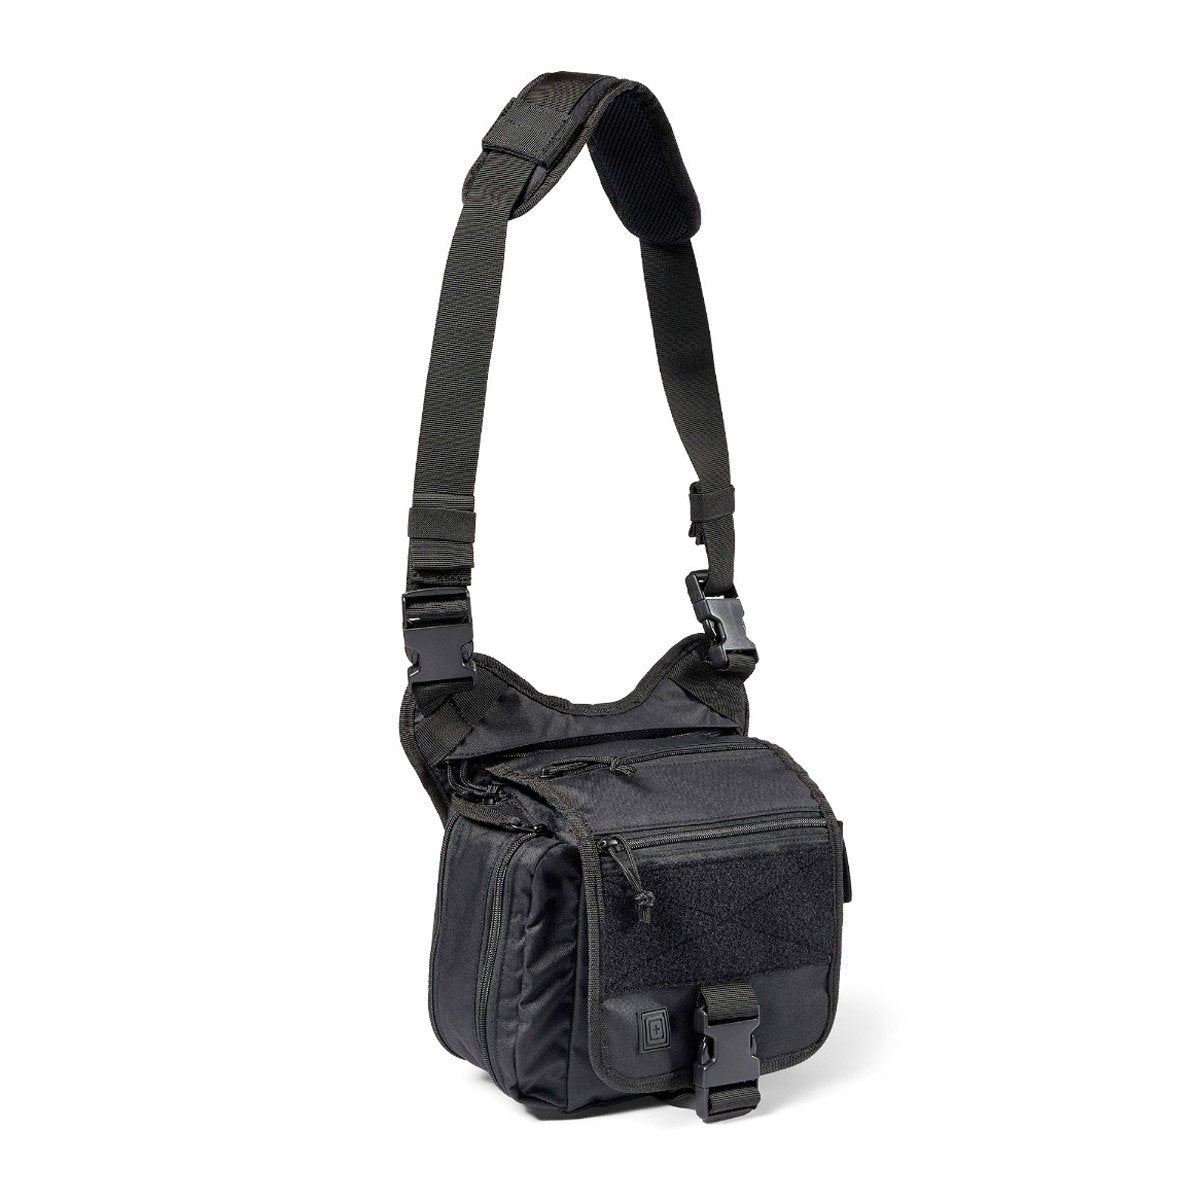 5.11 Tactical Daily Deploy Push Pack 5L Black Bags, Packs and Cases 5.11 Tactical Tactical Gear Supplier Tactical Distributors Australia